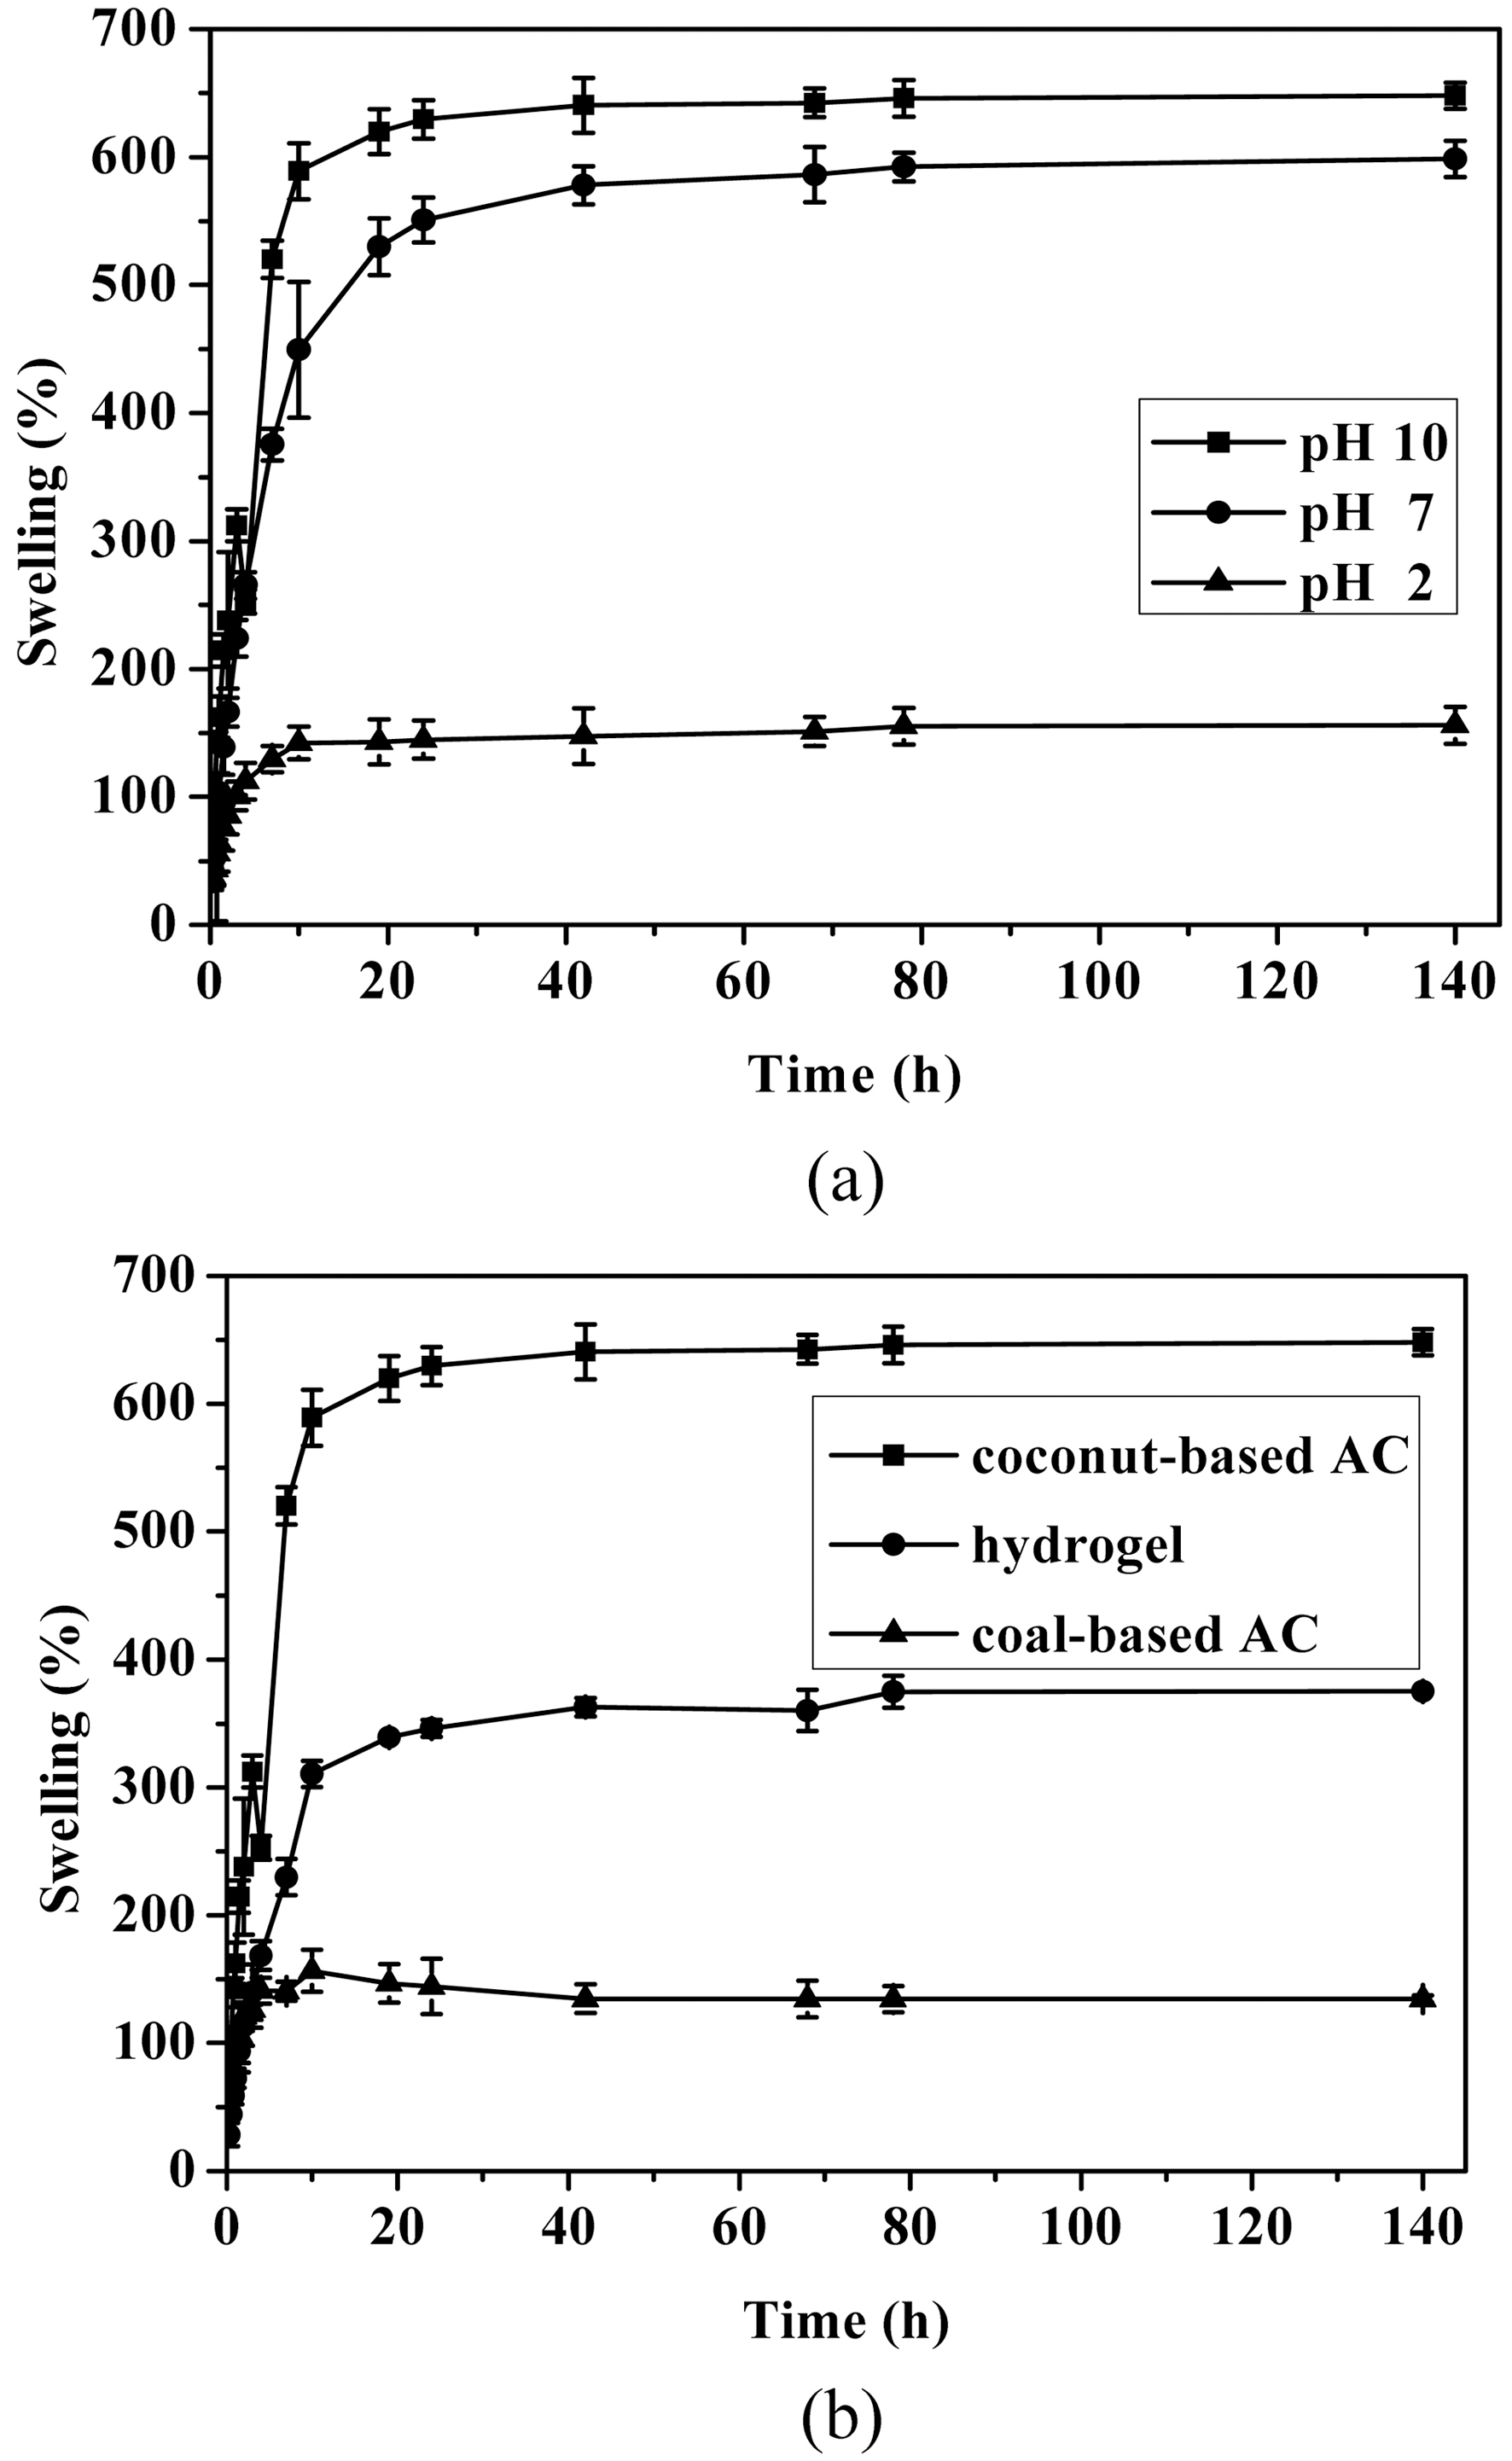 Swelling behavior of (a) coconut-based AC-containing PVA/PAAc composite hydrogel at several different pHs and (b) AC-containing PVA/PAAc composite hydrogel at pH 10.